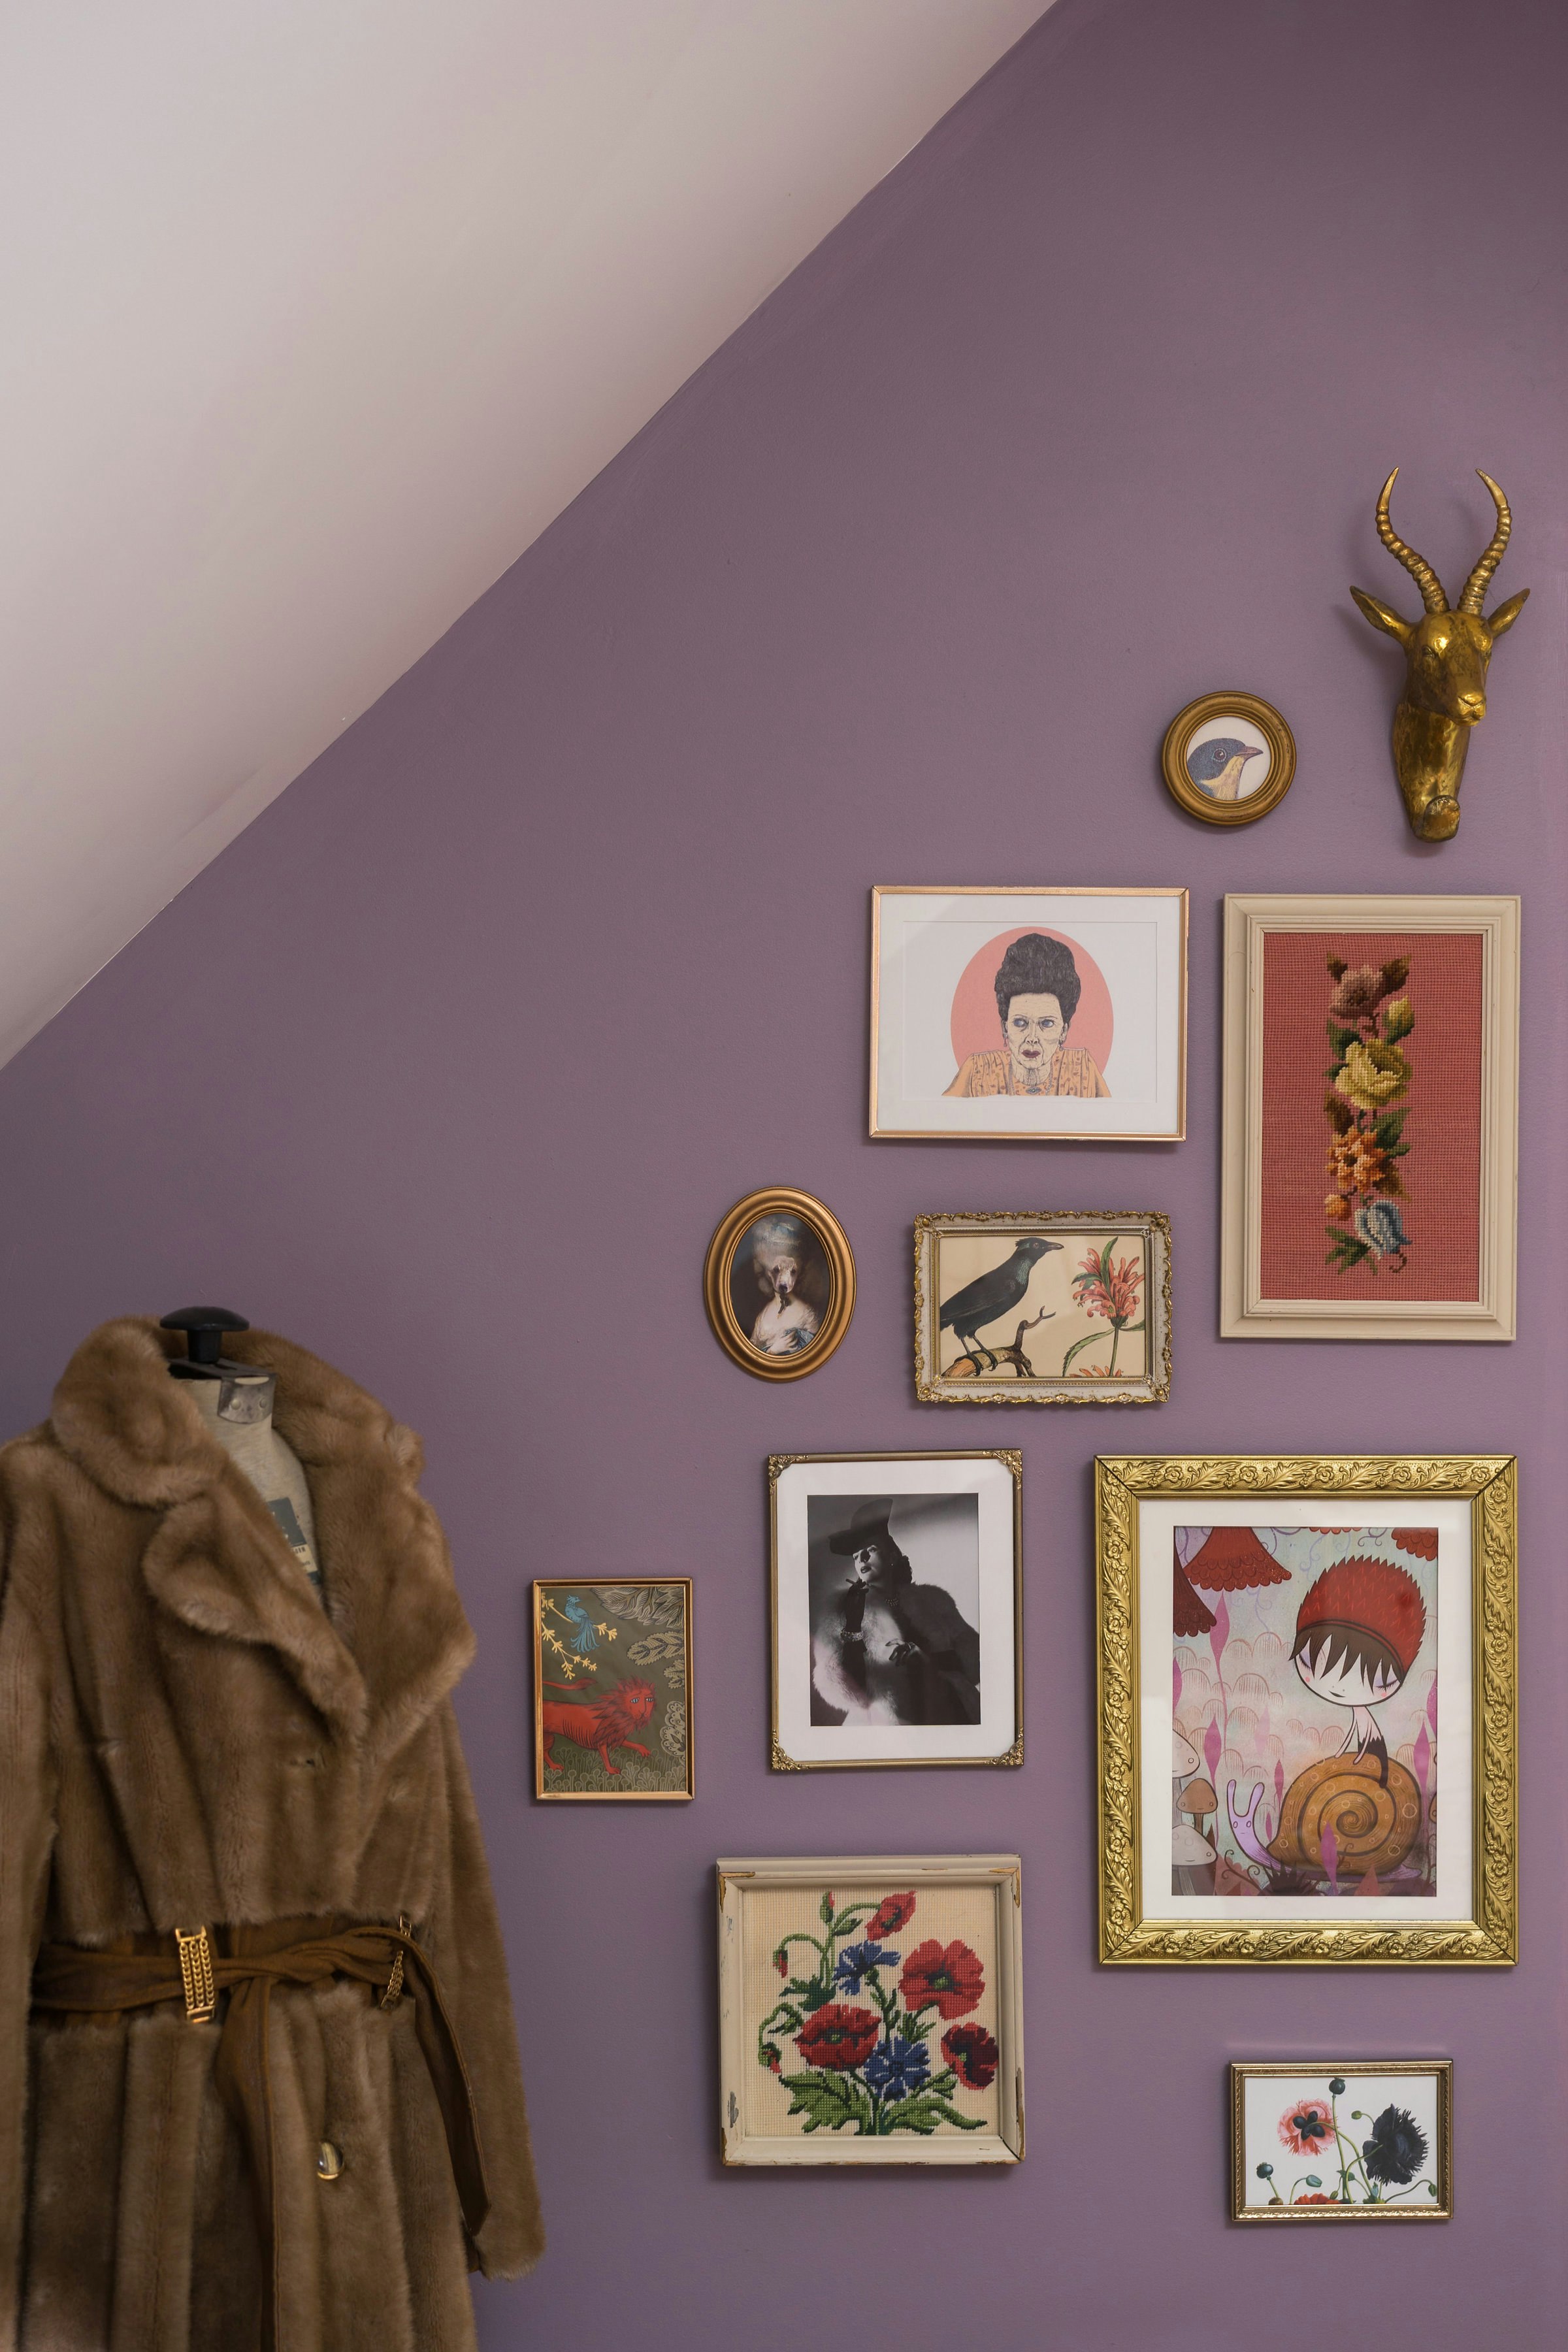 One of the bedrooms inspired by Margot Tenenbaum at Mr. Anderson's House.